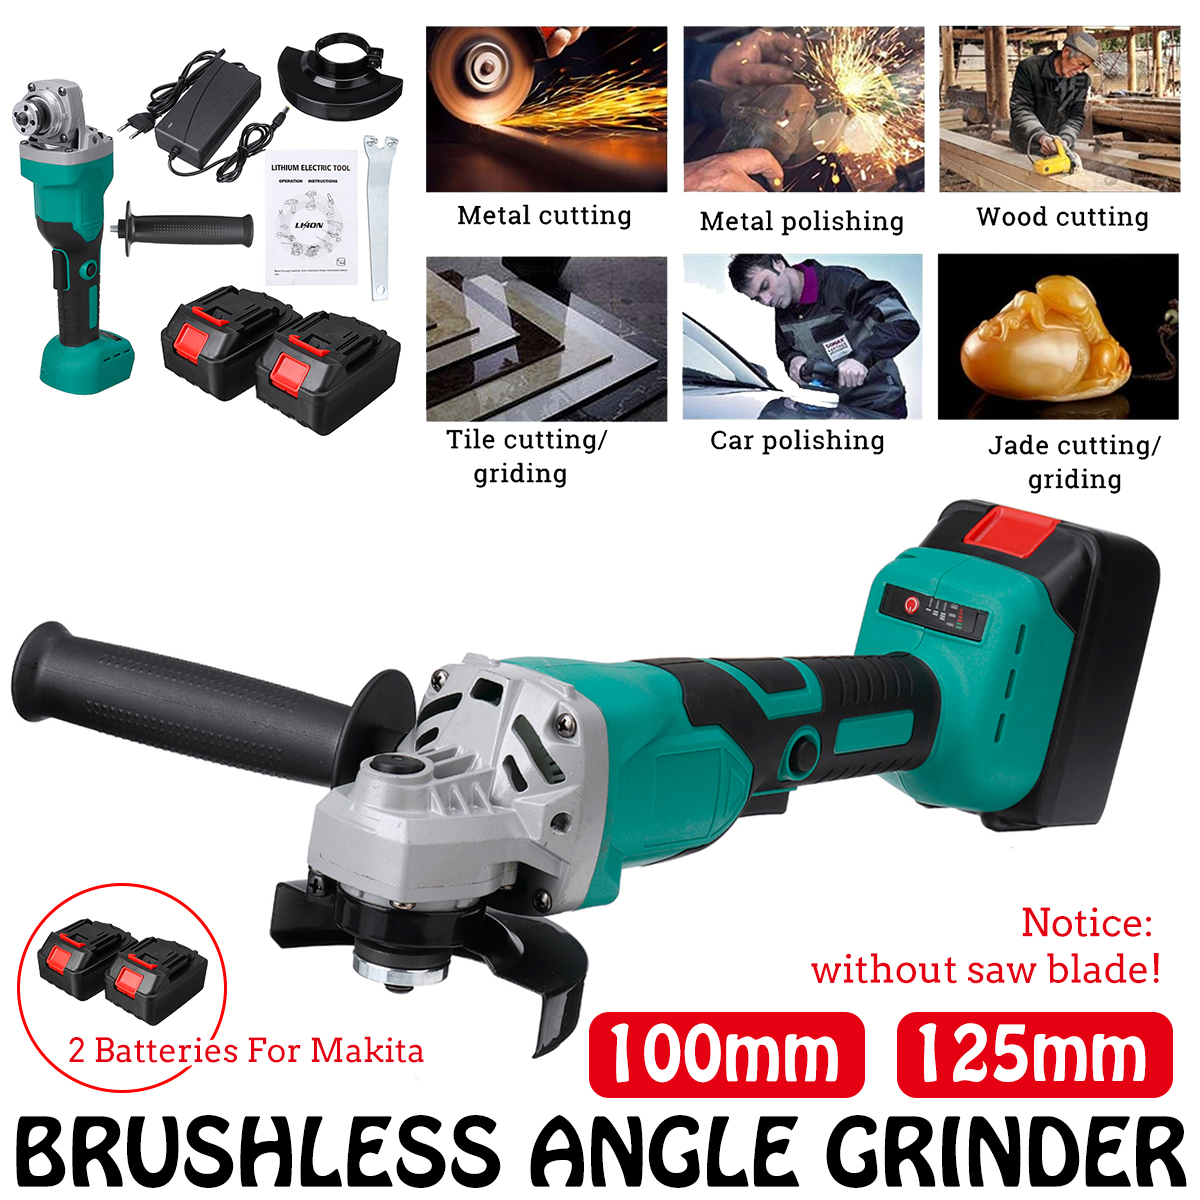 100mm125mm-Brushless-Electric-Angle-Grinder-Polishing-Grinding-Cutting-Tool-W-12-Battery-For-Makita-1861077-2